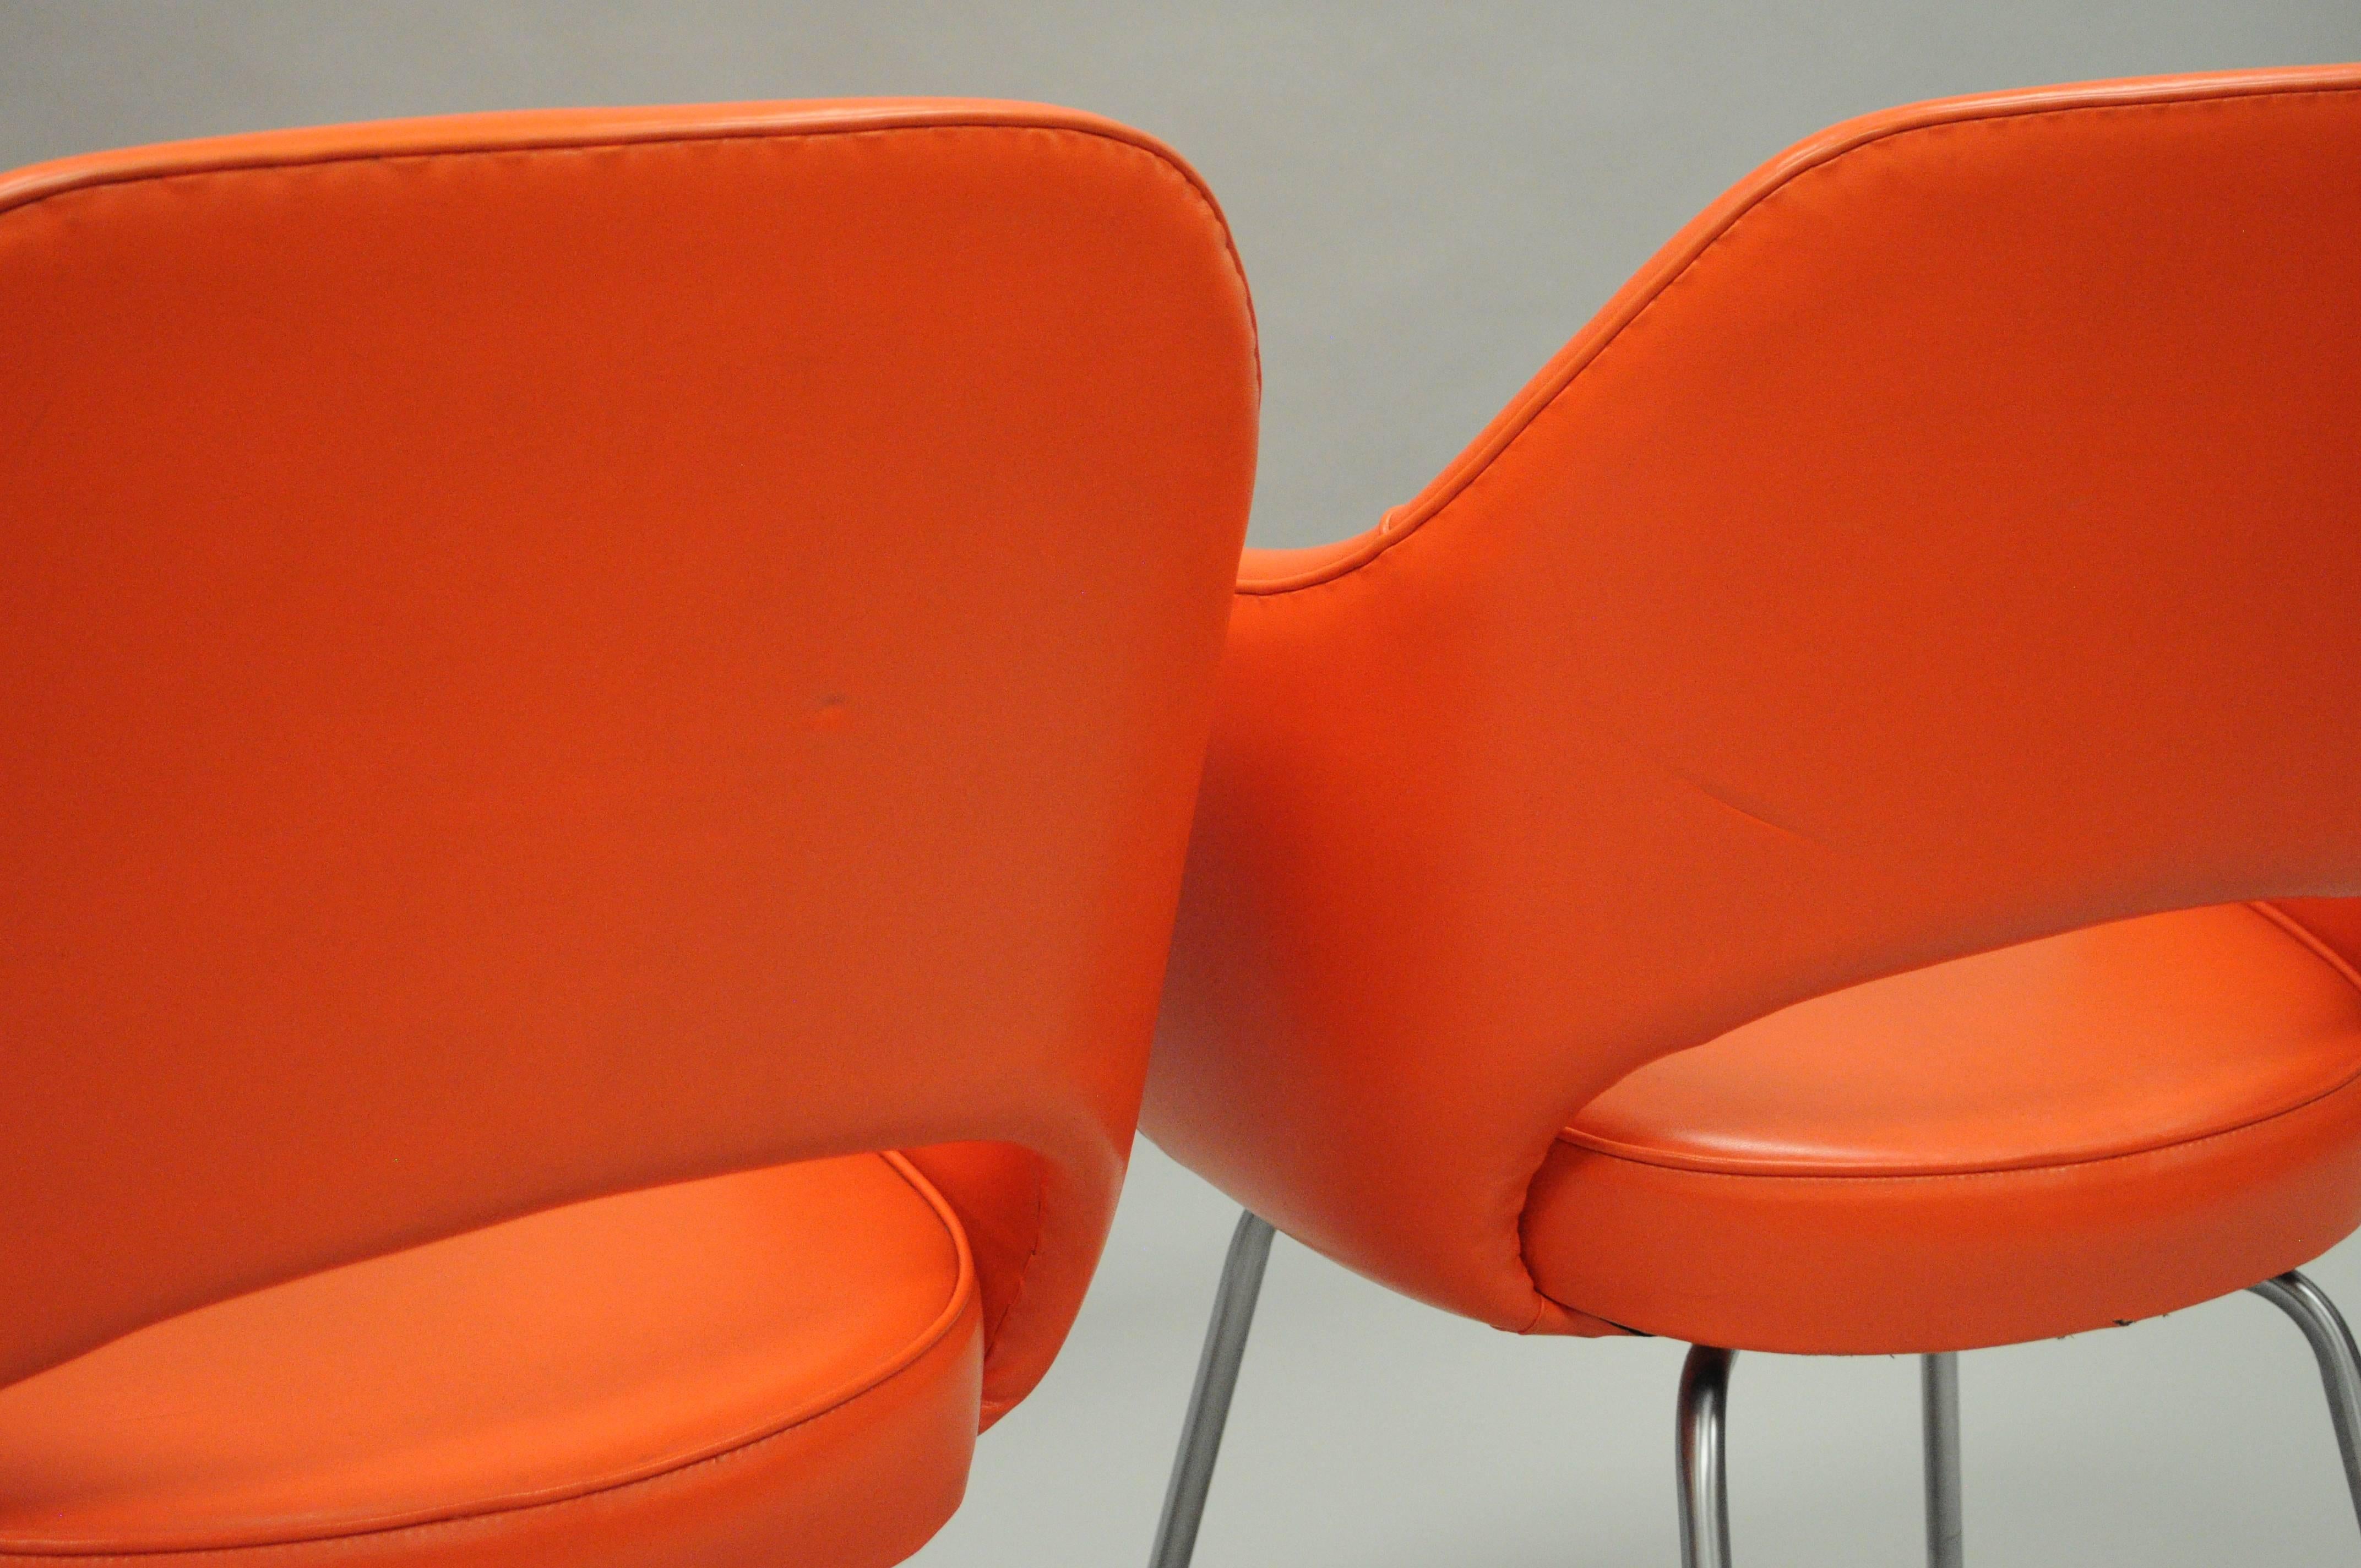 Pair of Eero Saarinen for Knoll Executive Arm Chairs Early Original Orange Vinyl In Good Condition For Sale In Philadelphia, PA